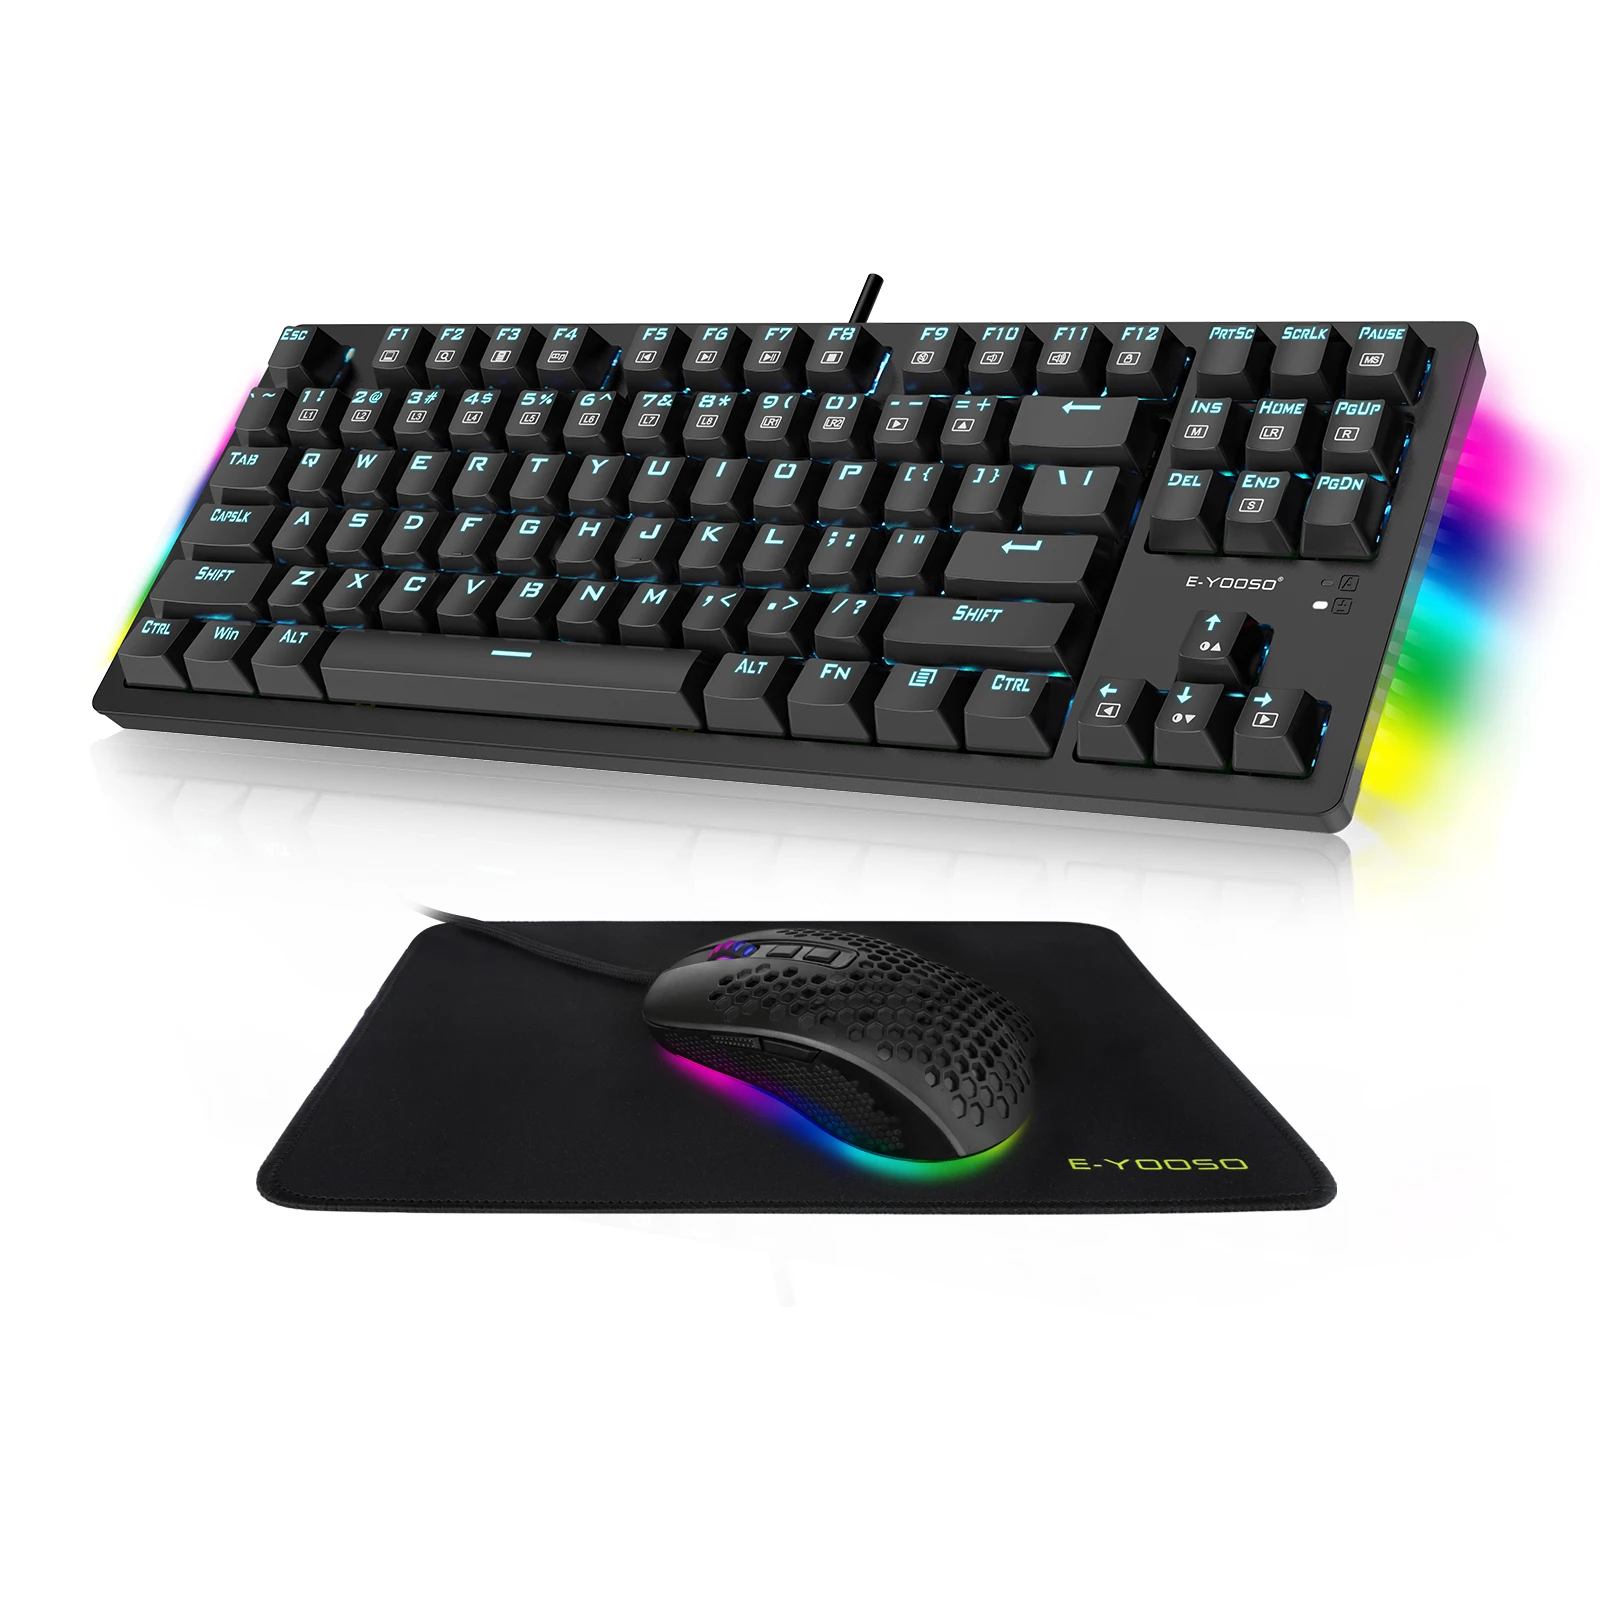 

Mechanical Gaming Keyboard and Mouse Combo, E-YOOSO 87 Keys Hot Swap Blue Switches Wired Gaming Keyboard, Black